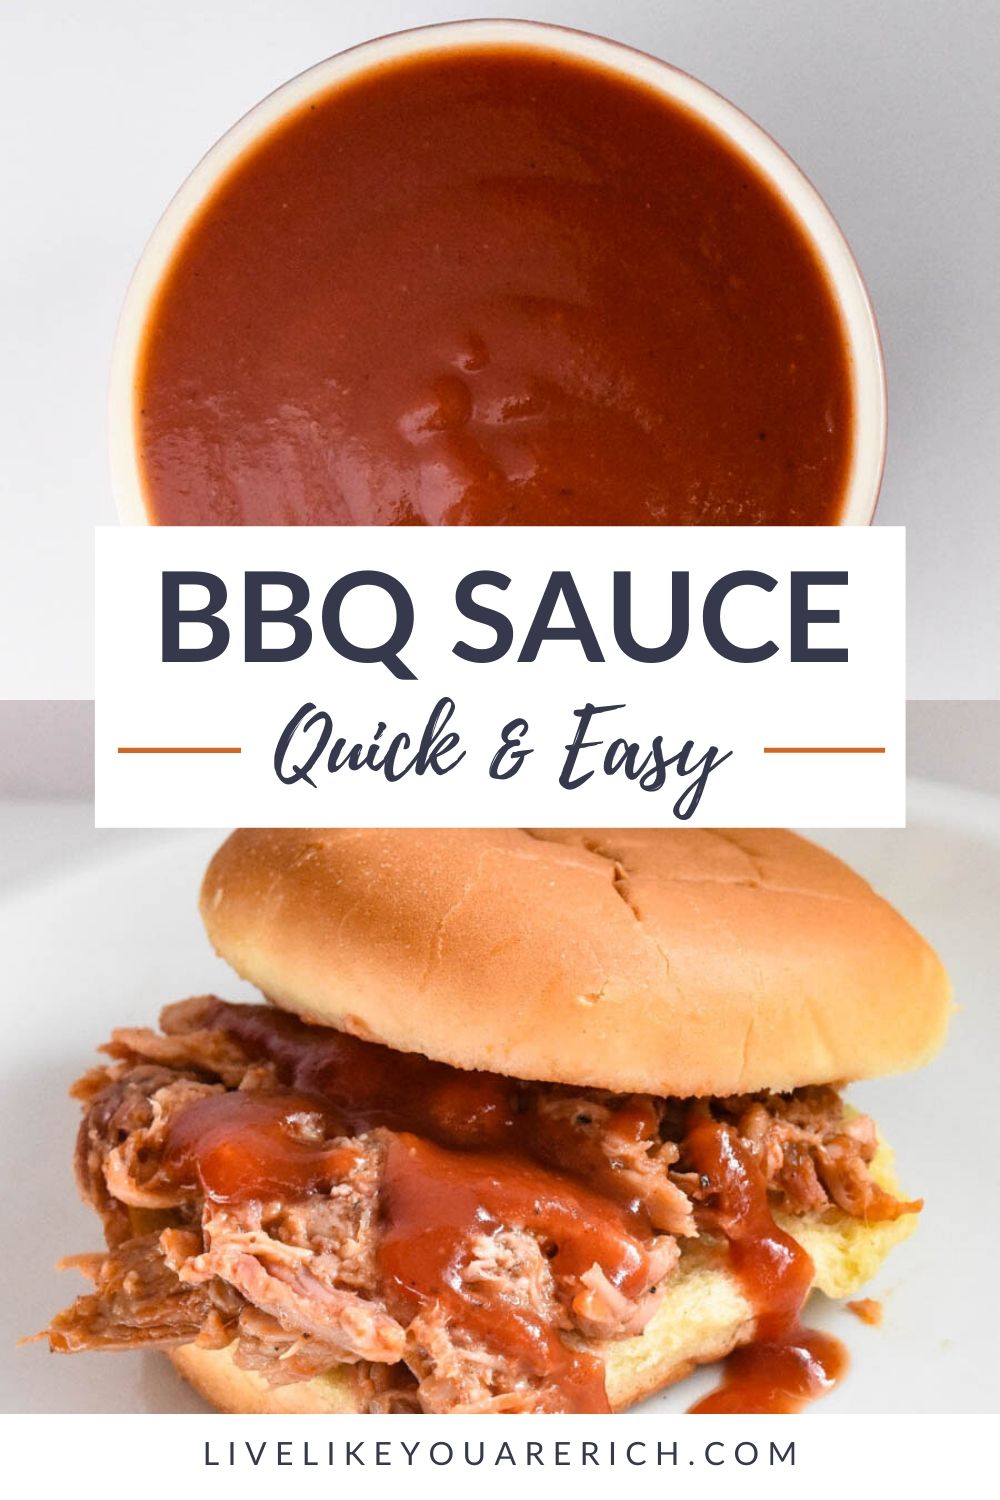 If you have never tried homemade BBQ sauce you NEED to—especially this recipe! It tastes way better than the store-bought varieties. It is so fresh and the flavors balance each other out amazingly well. There is a little bit of sweet, salty, mild spice, and smoke, which together form the BEST homemade BBQ sauce ever.